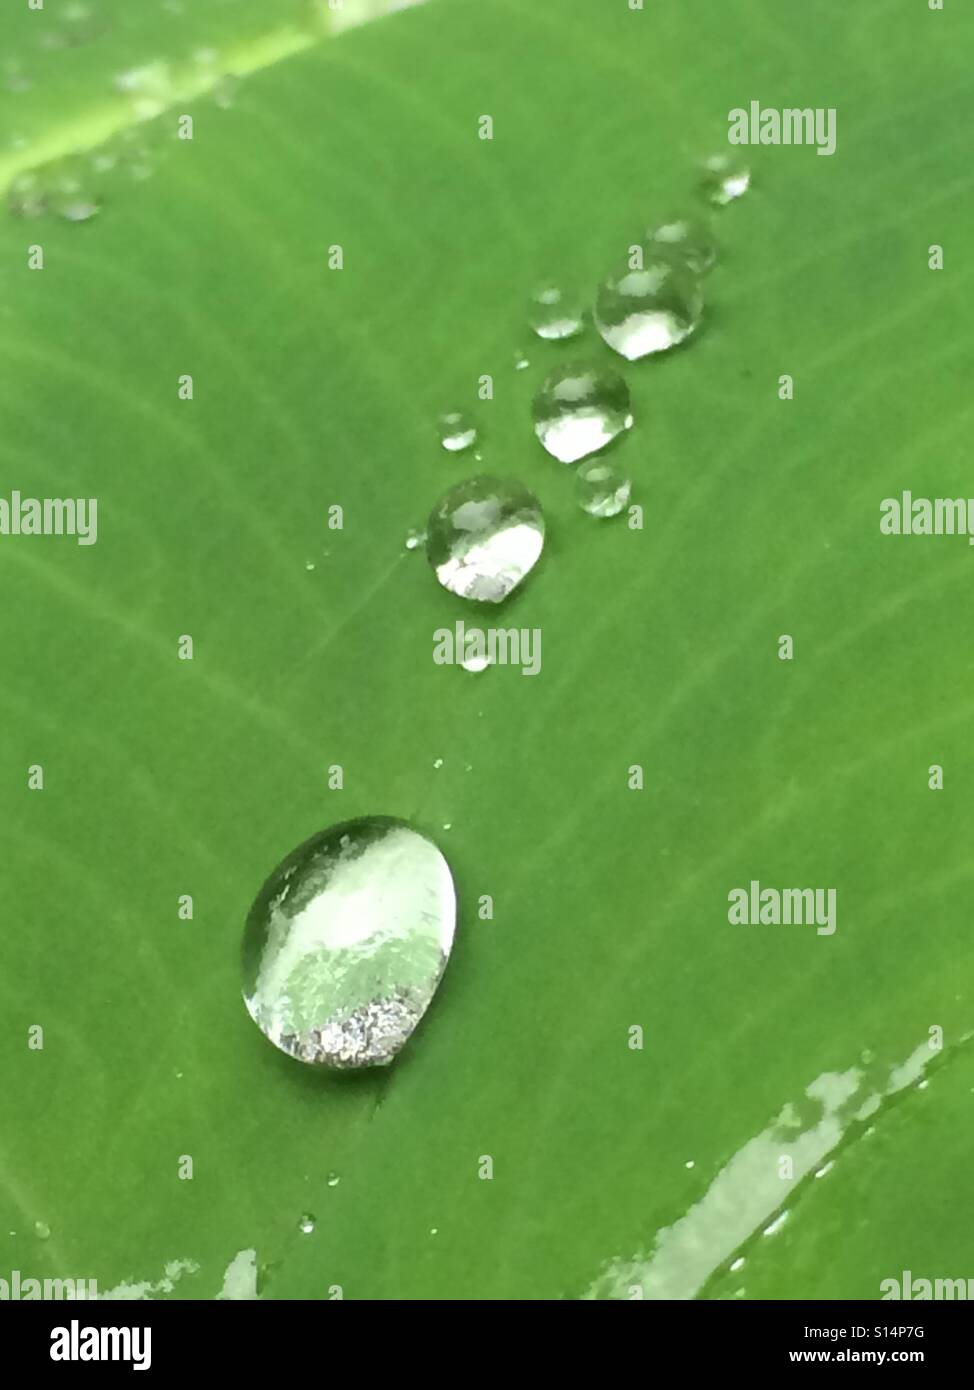 Shimmering rain droplets resting on a leaf. Stock Photo